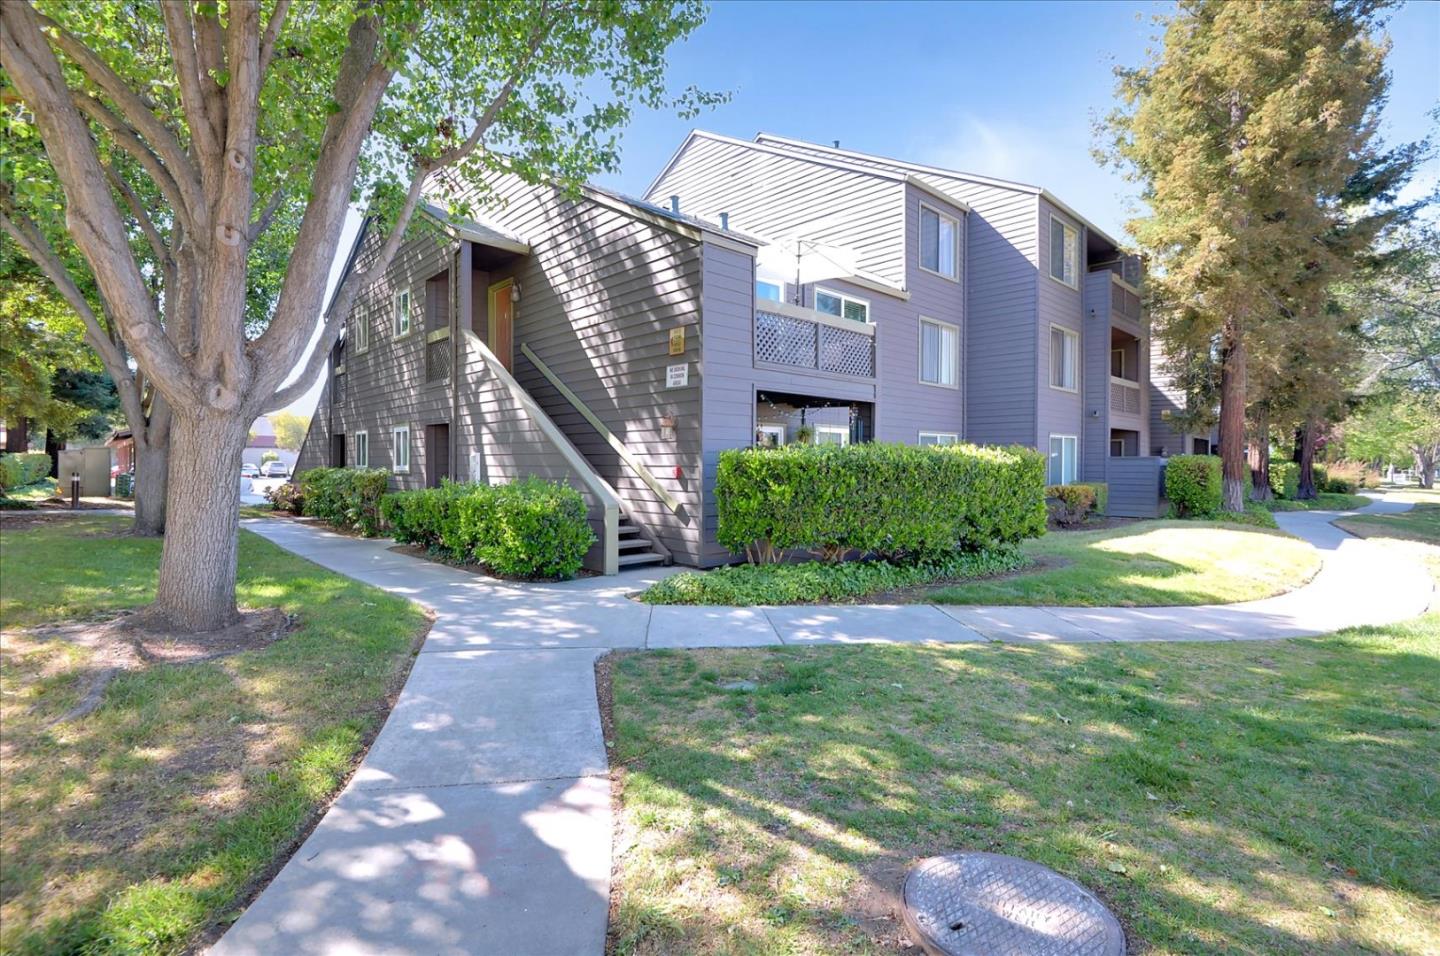 Wow! Seller has put alot of improvements in this beautiful bright end unit & turn key condition! Great location with private use of stairs, beautiful landscaped grounds left of the unit.  Your buyers will not be disaapointed!, new double paned windows & sliding patio glass door, plush neutral color carpets, upgraded bathroom with instant water shut off for unit, newer washer & dryer appliances, updated kitchen with glass decorated doors, all new ceiling fans and light fixtures, check out the modern barn style door in the bedroom, recessed ceiling lights, new patio deck, extra storage, cabana with pools and work out room. Short drive to  Santana Row, Westfield Shopping Center, Freeway 680/880, Downtown San Jose and to all major work companies in Santa Clara County.